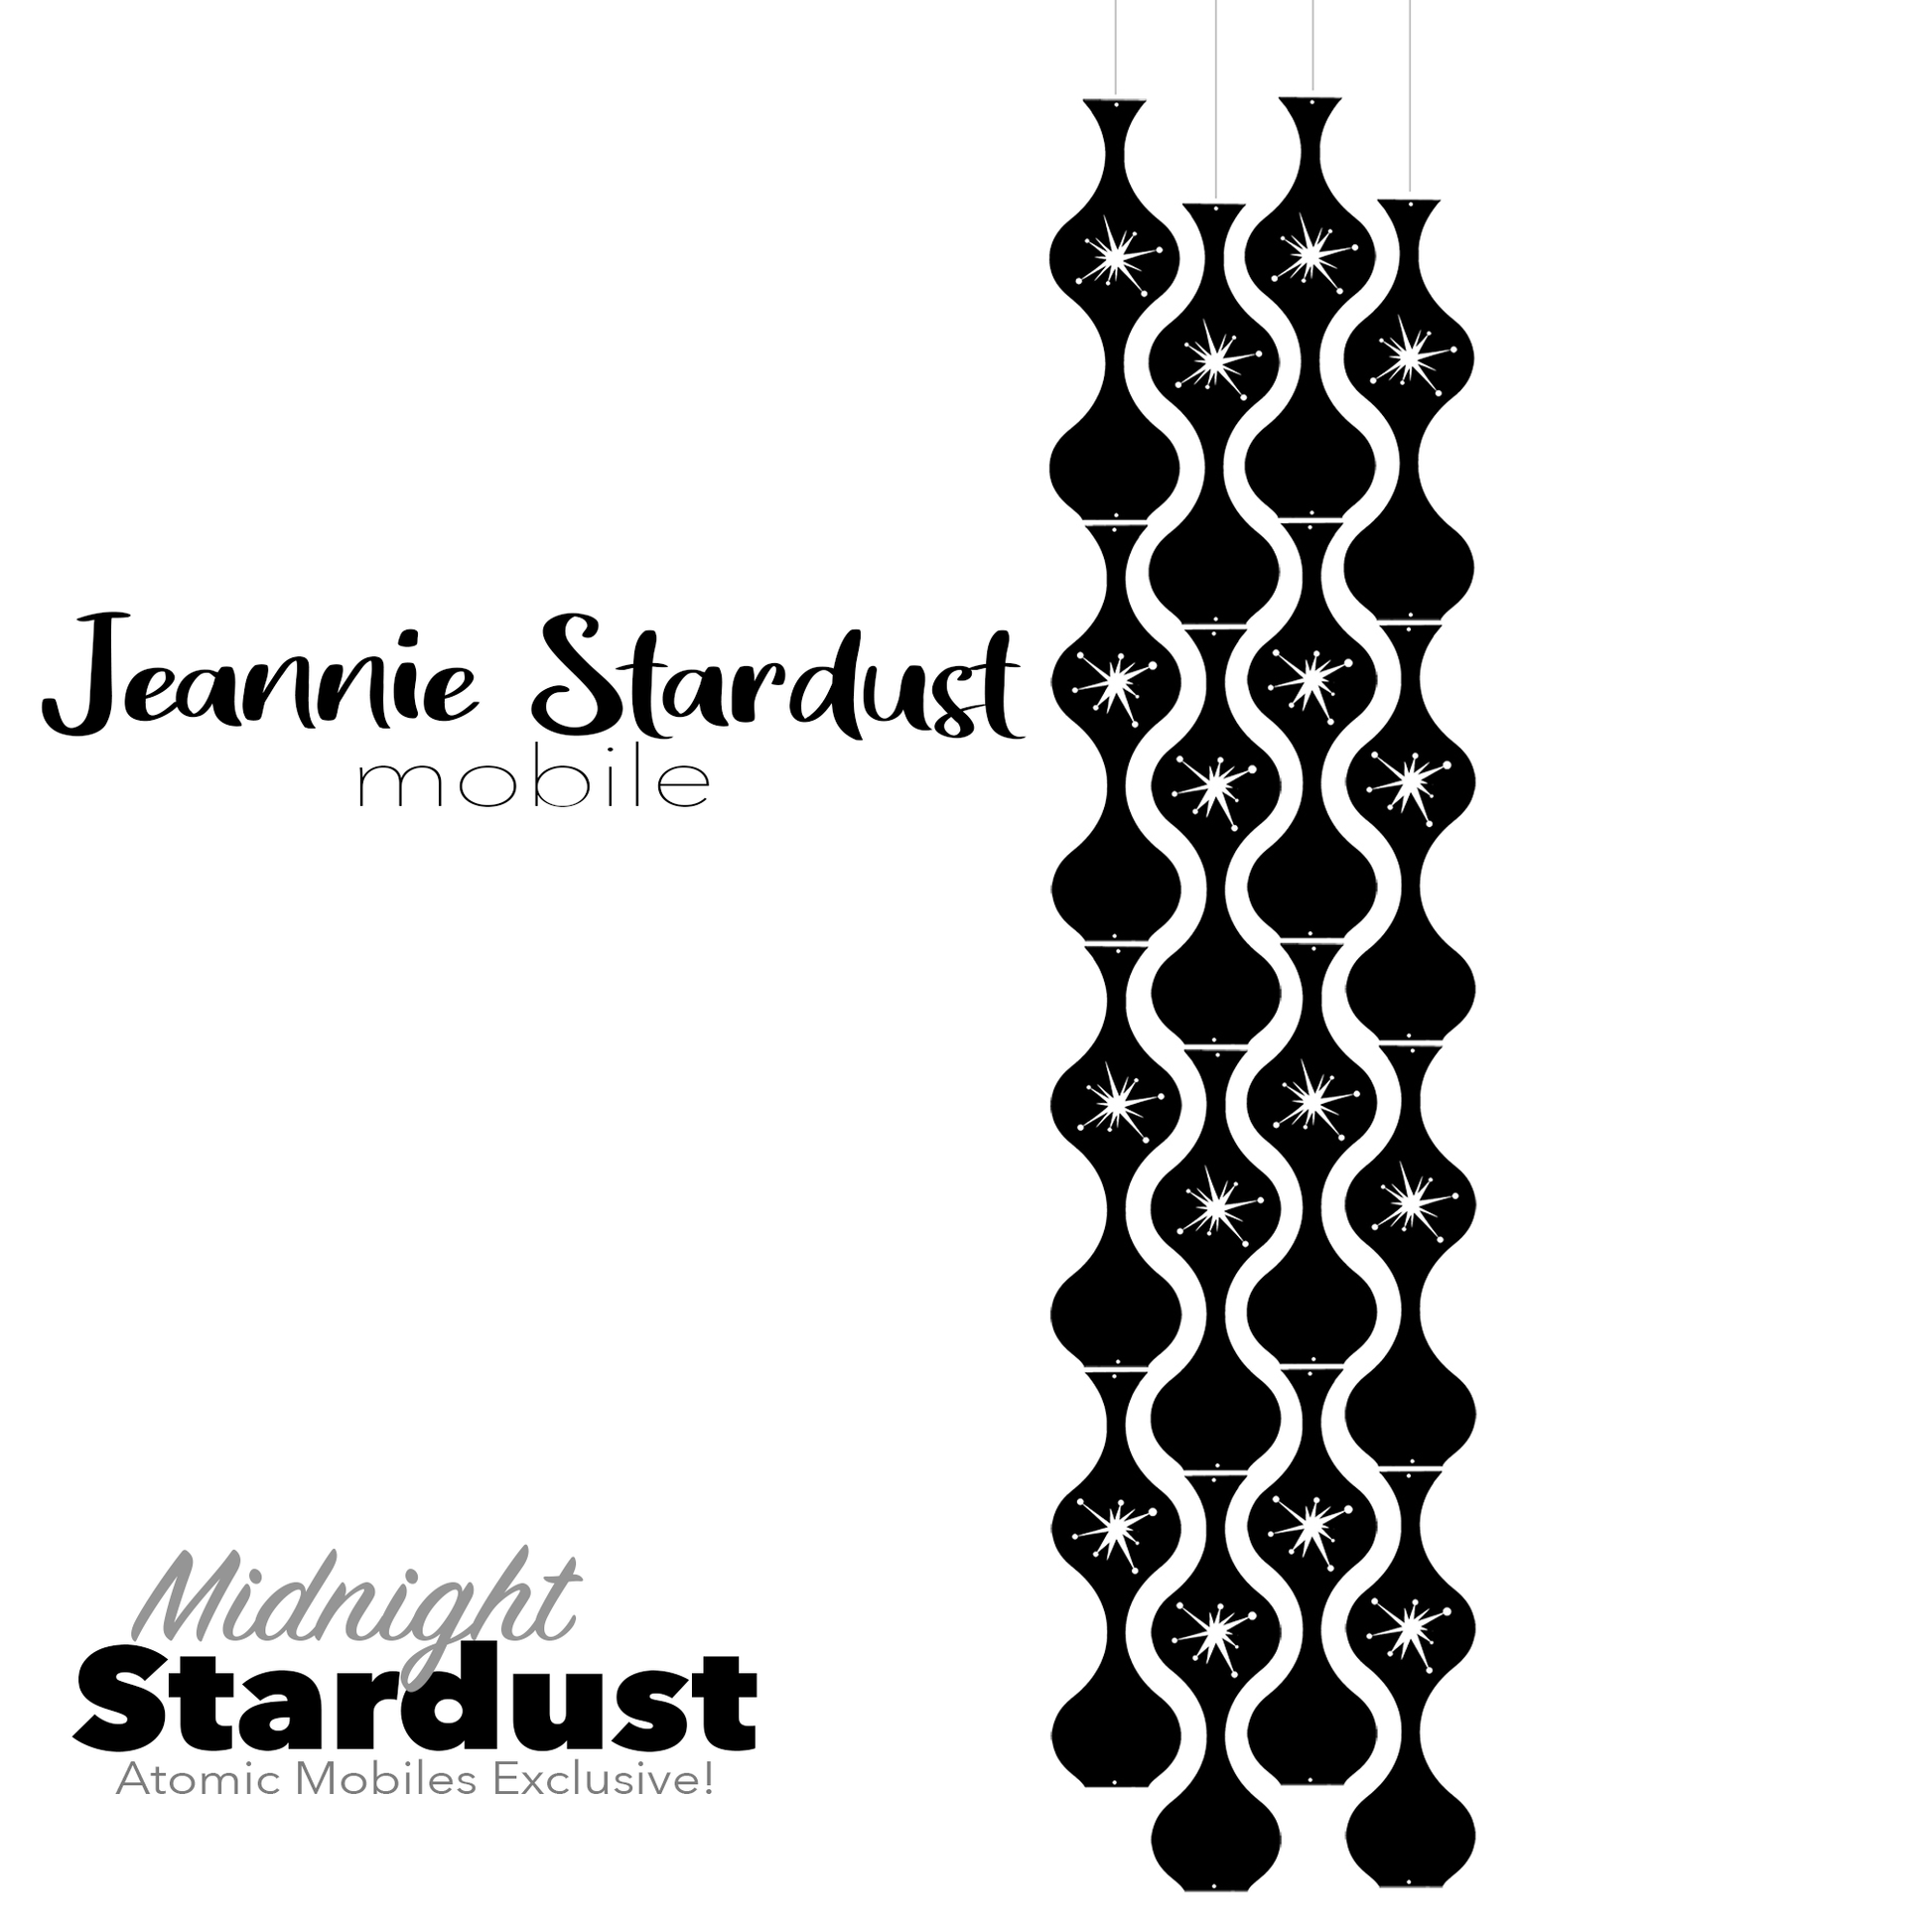 Midnight Stardust Jeannie Stardust Hanging Art Mobile - mid century modern home decor in Black - by AtomicMobiles.com